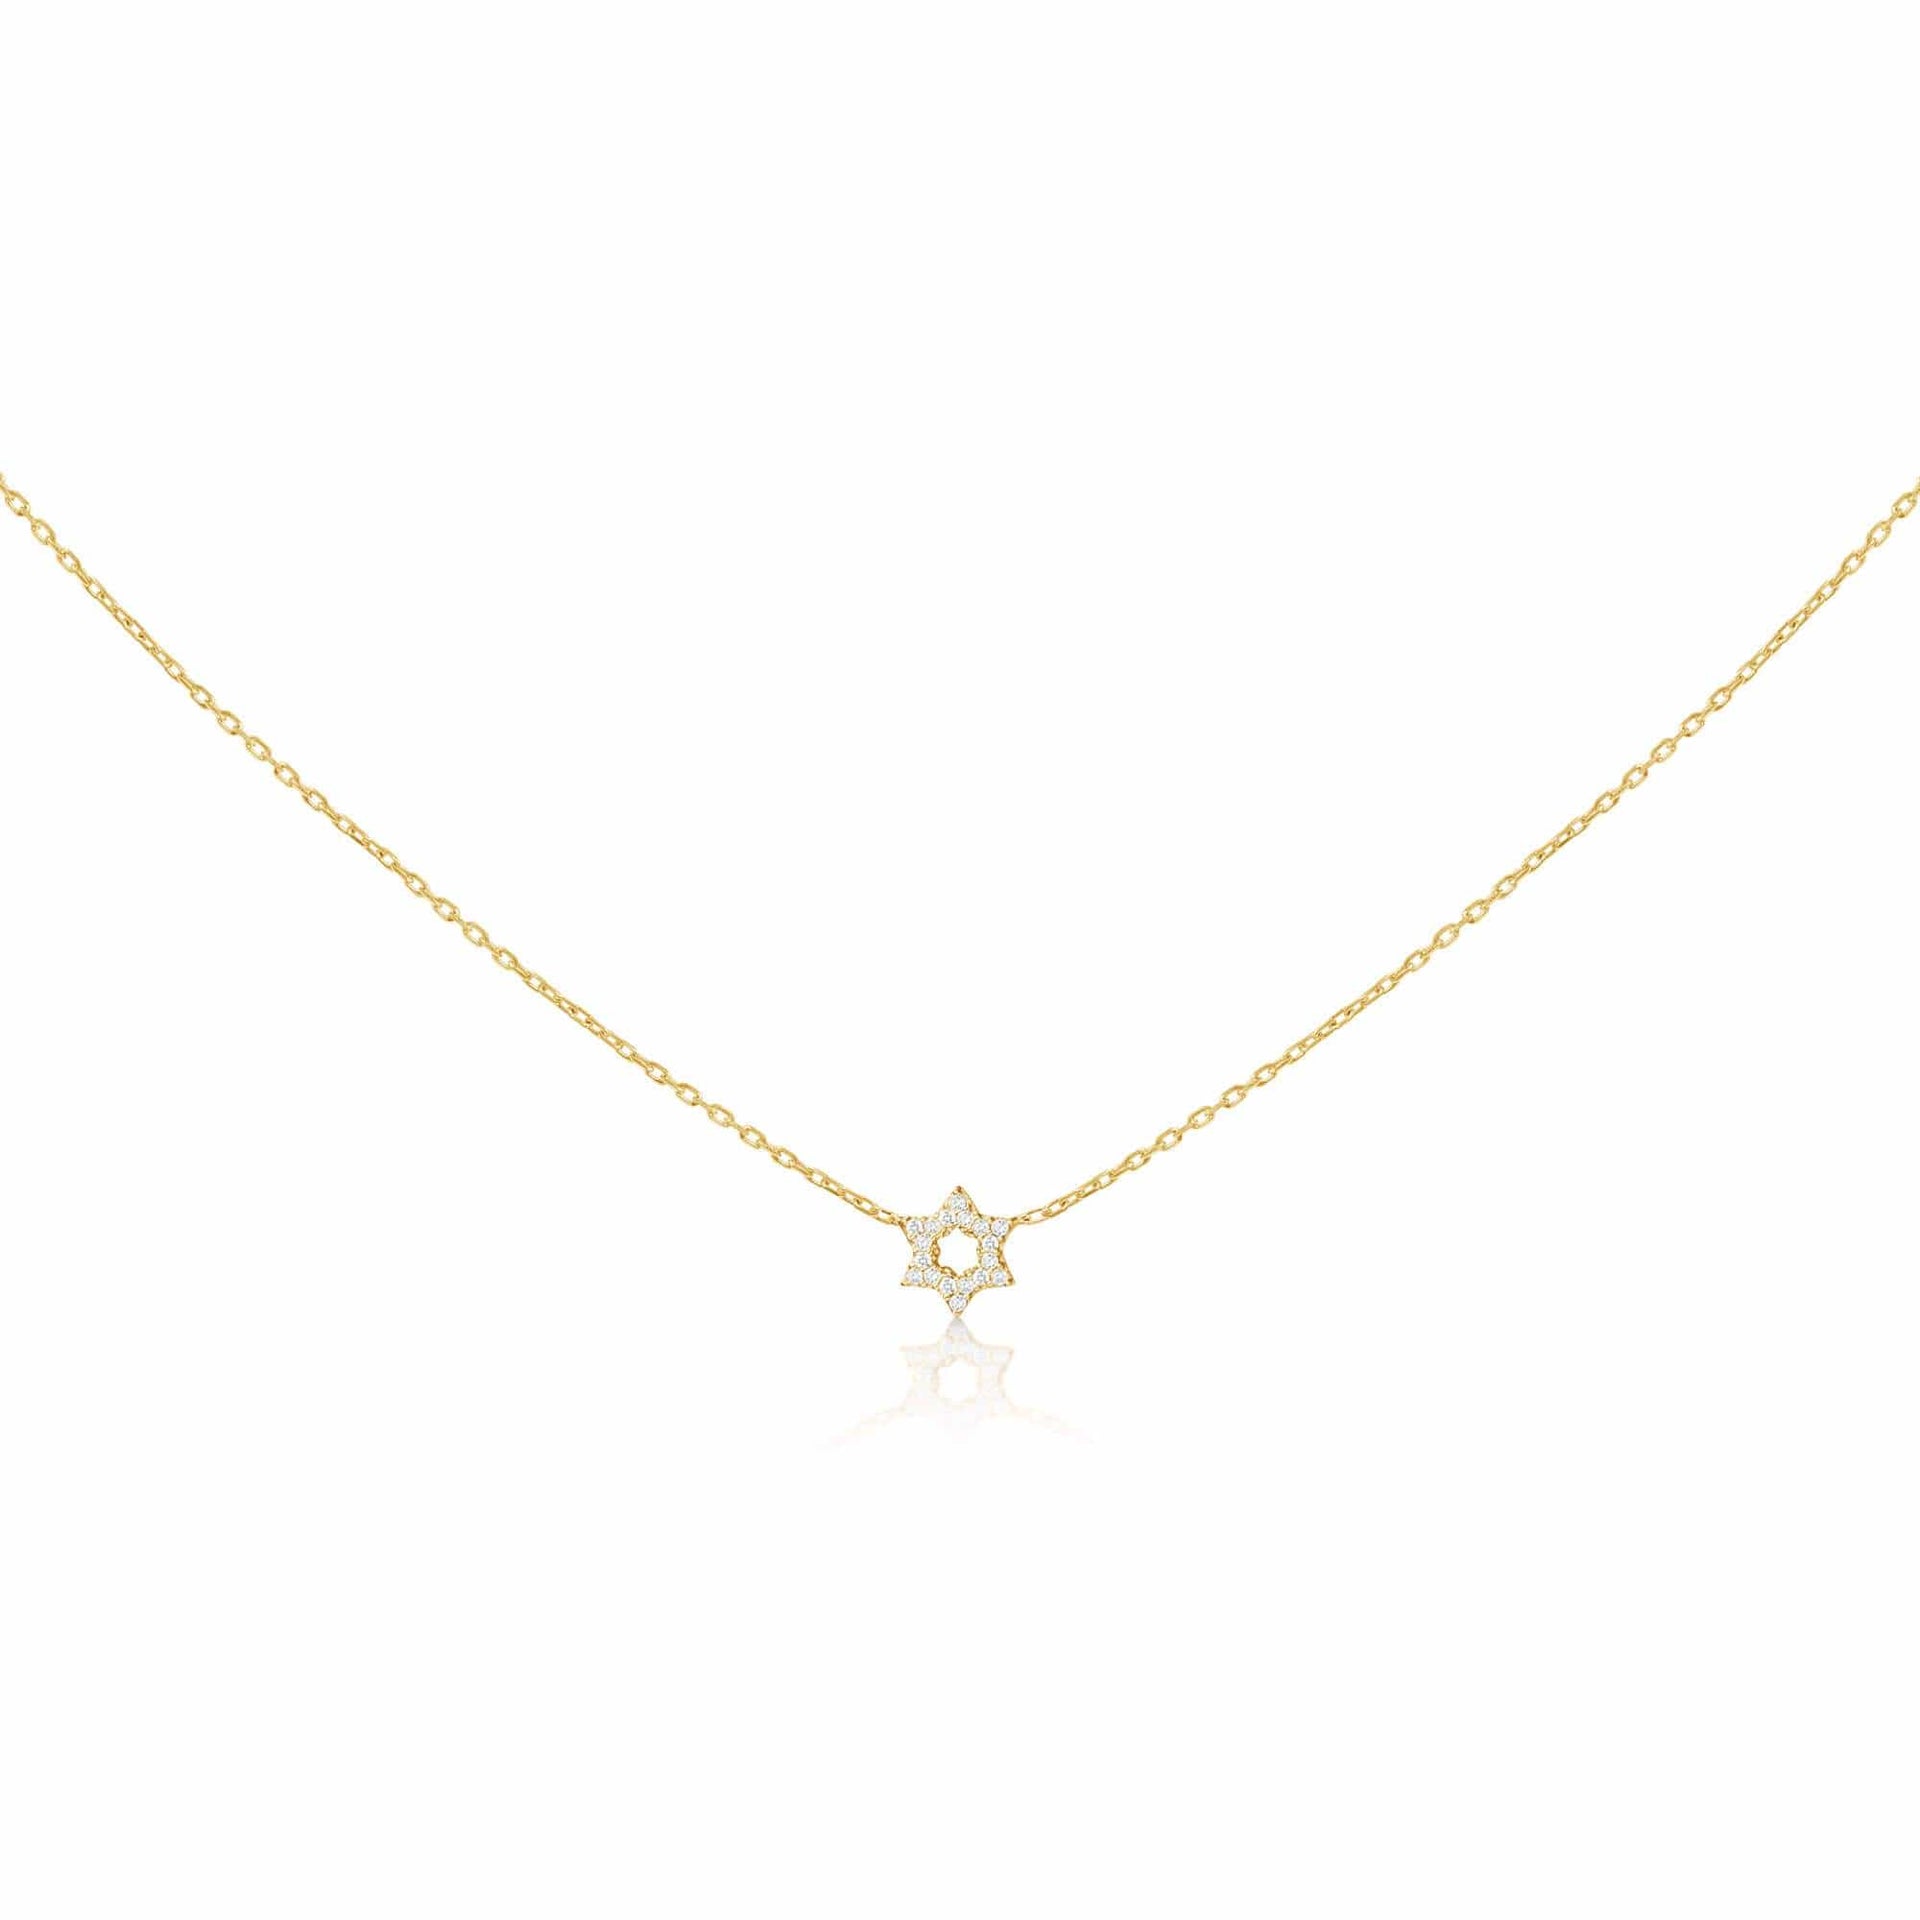 Alef Bet Necklaces Gold / 16" chain Diamond Pendant with Jewish Star of David in 14k Yellow Gold, White Gold or Rose Gold